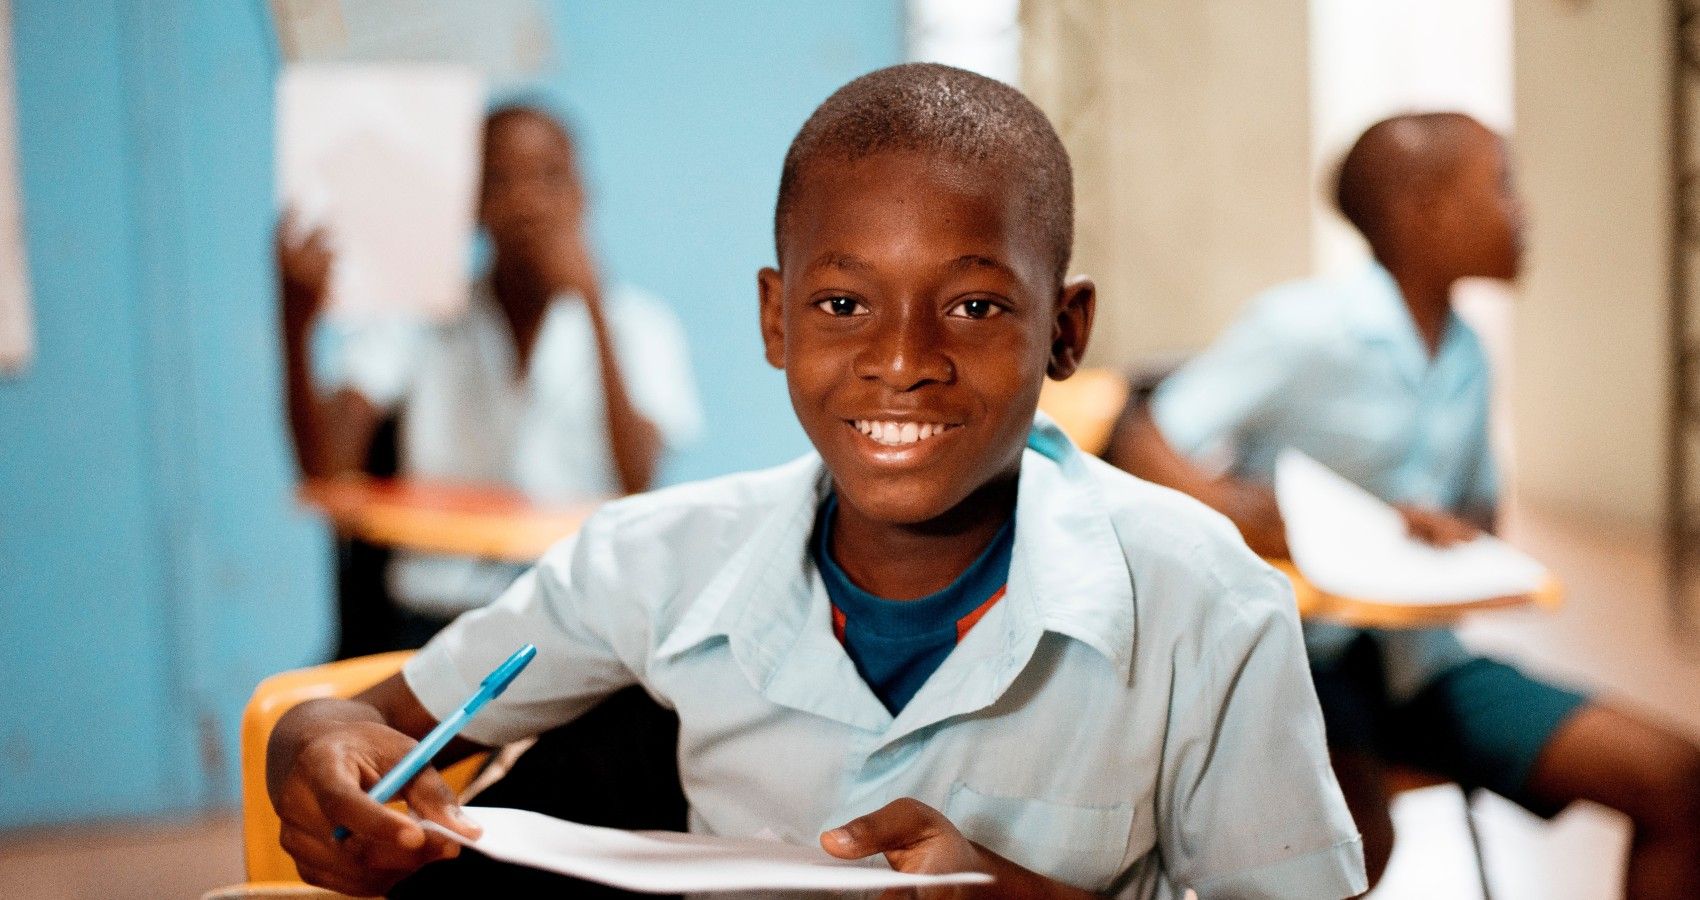 A black student smiling in a classroom